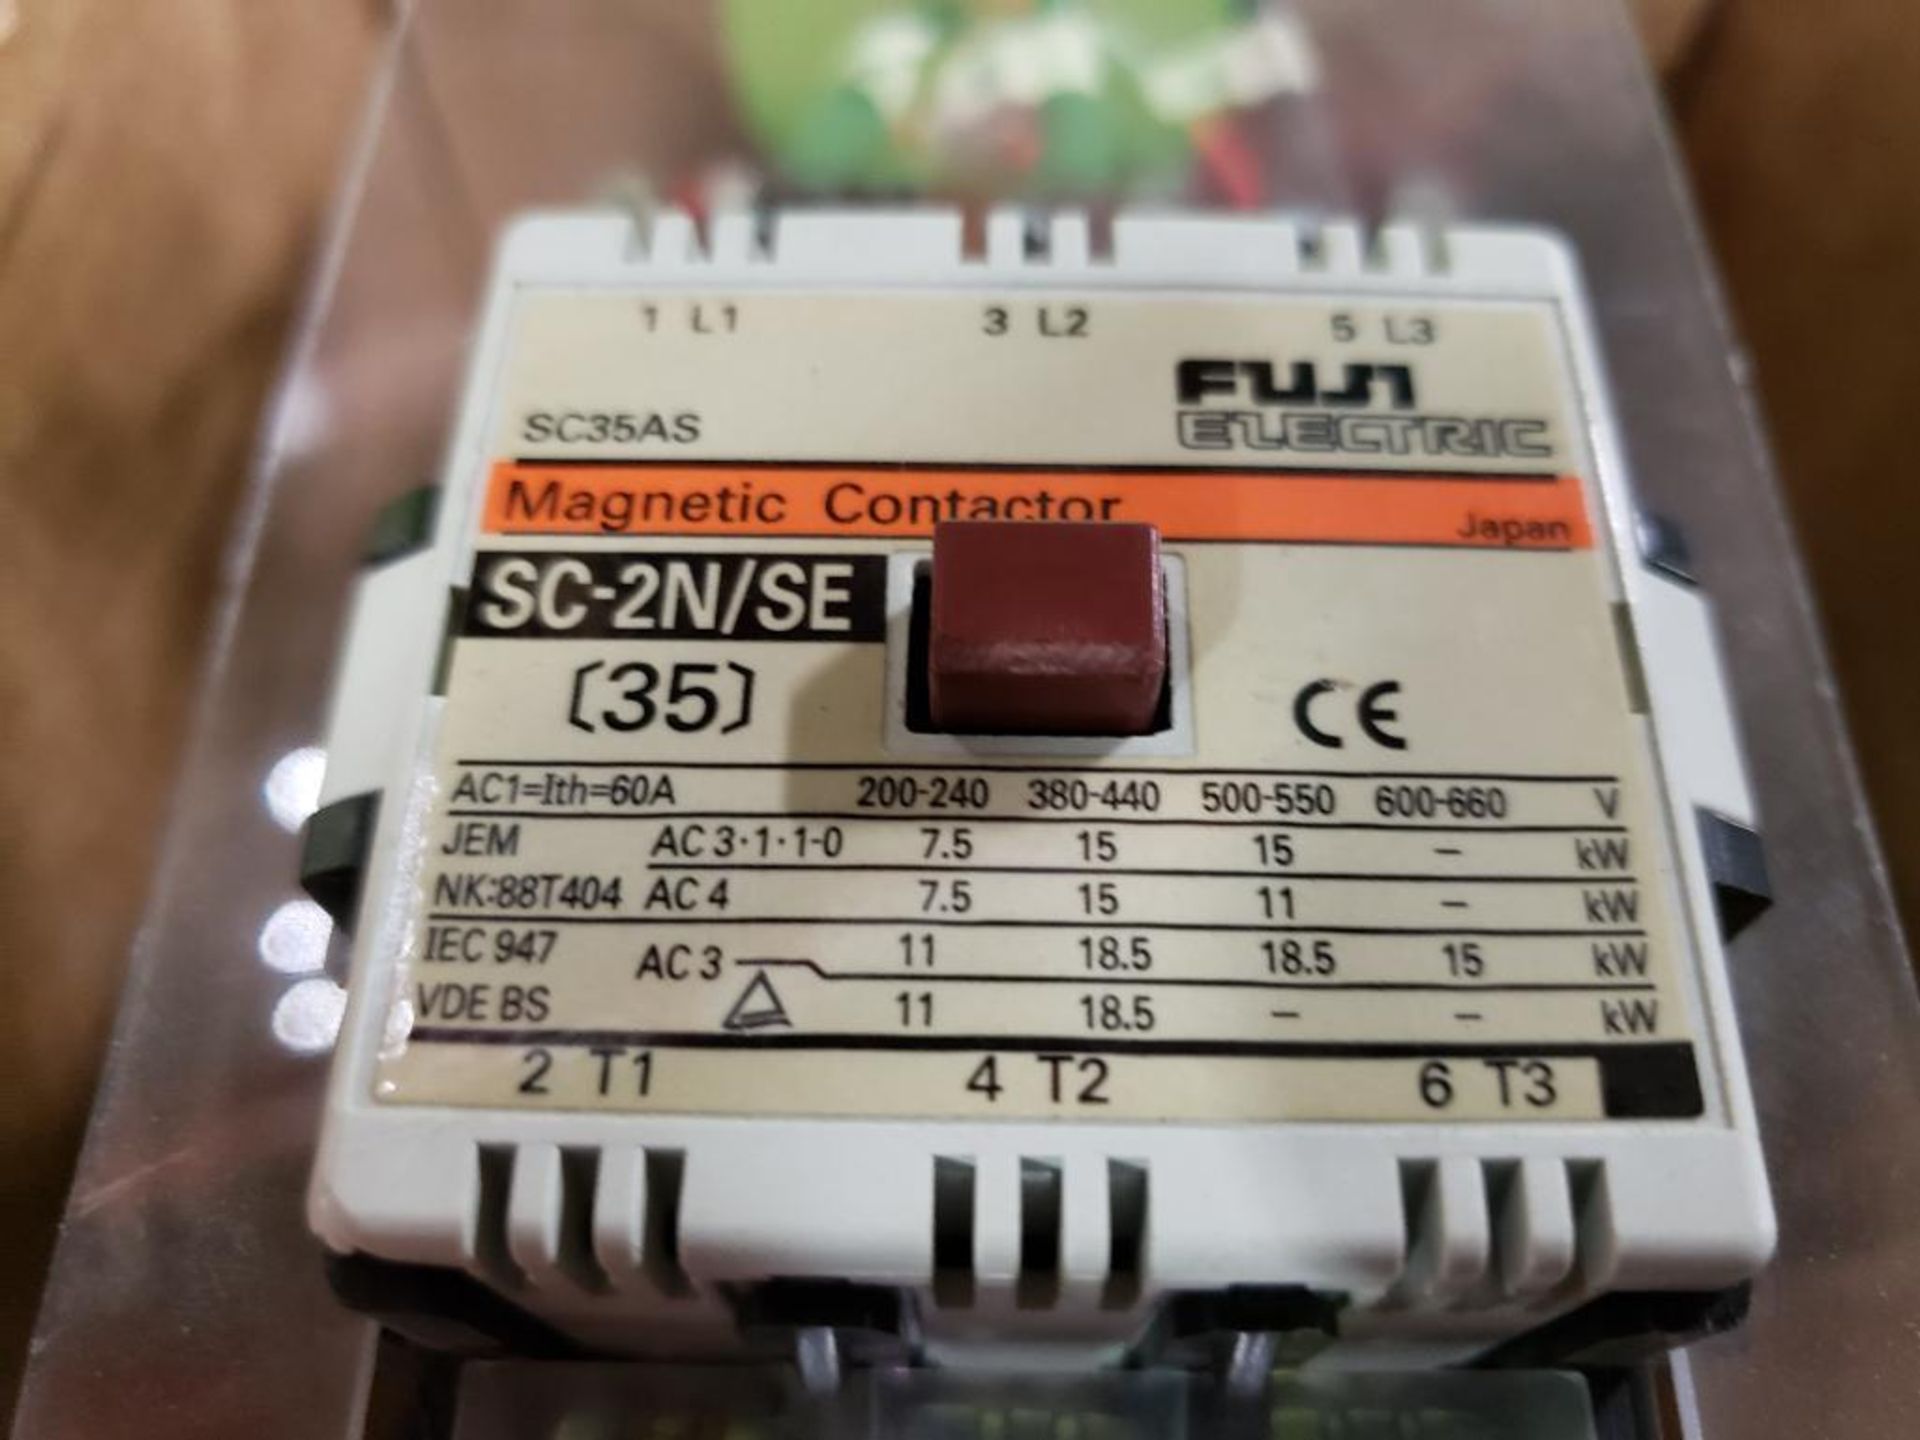 Fuji Electric SC-2N/SE Magnetic contactor. - Image 4 of 4